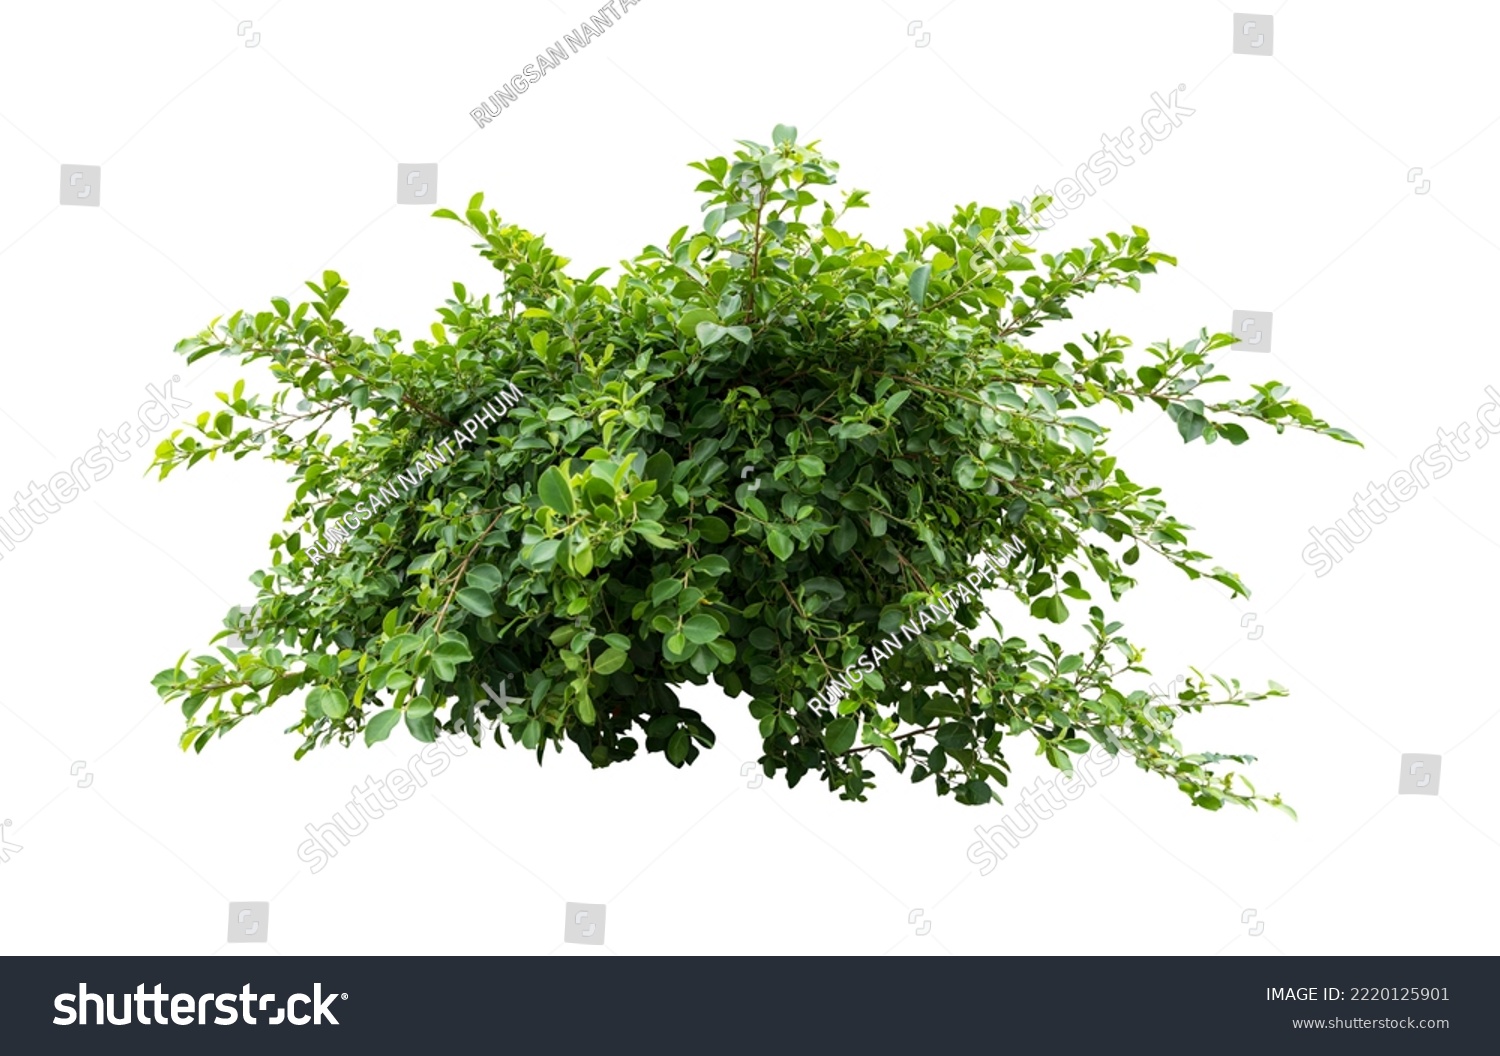 Tropical plant flower bush shrub tree isolated on white background with clipping path #2220125901